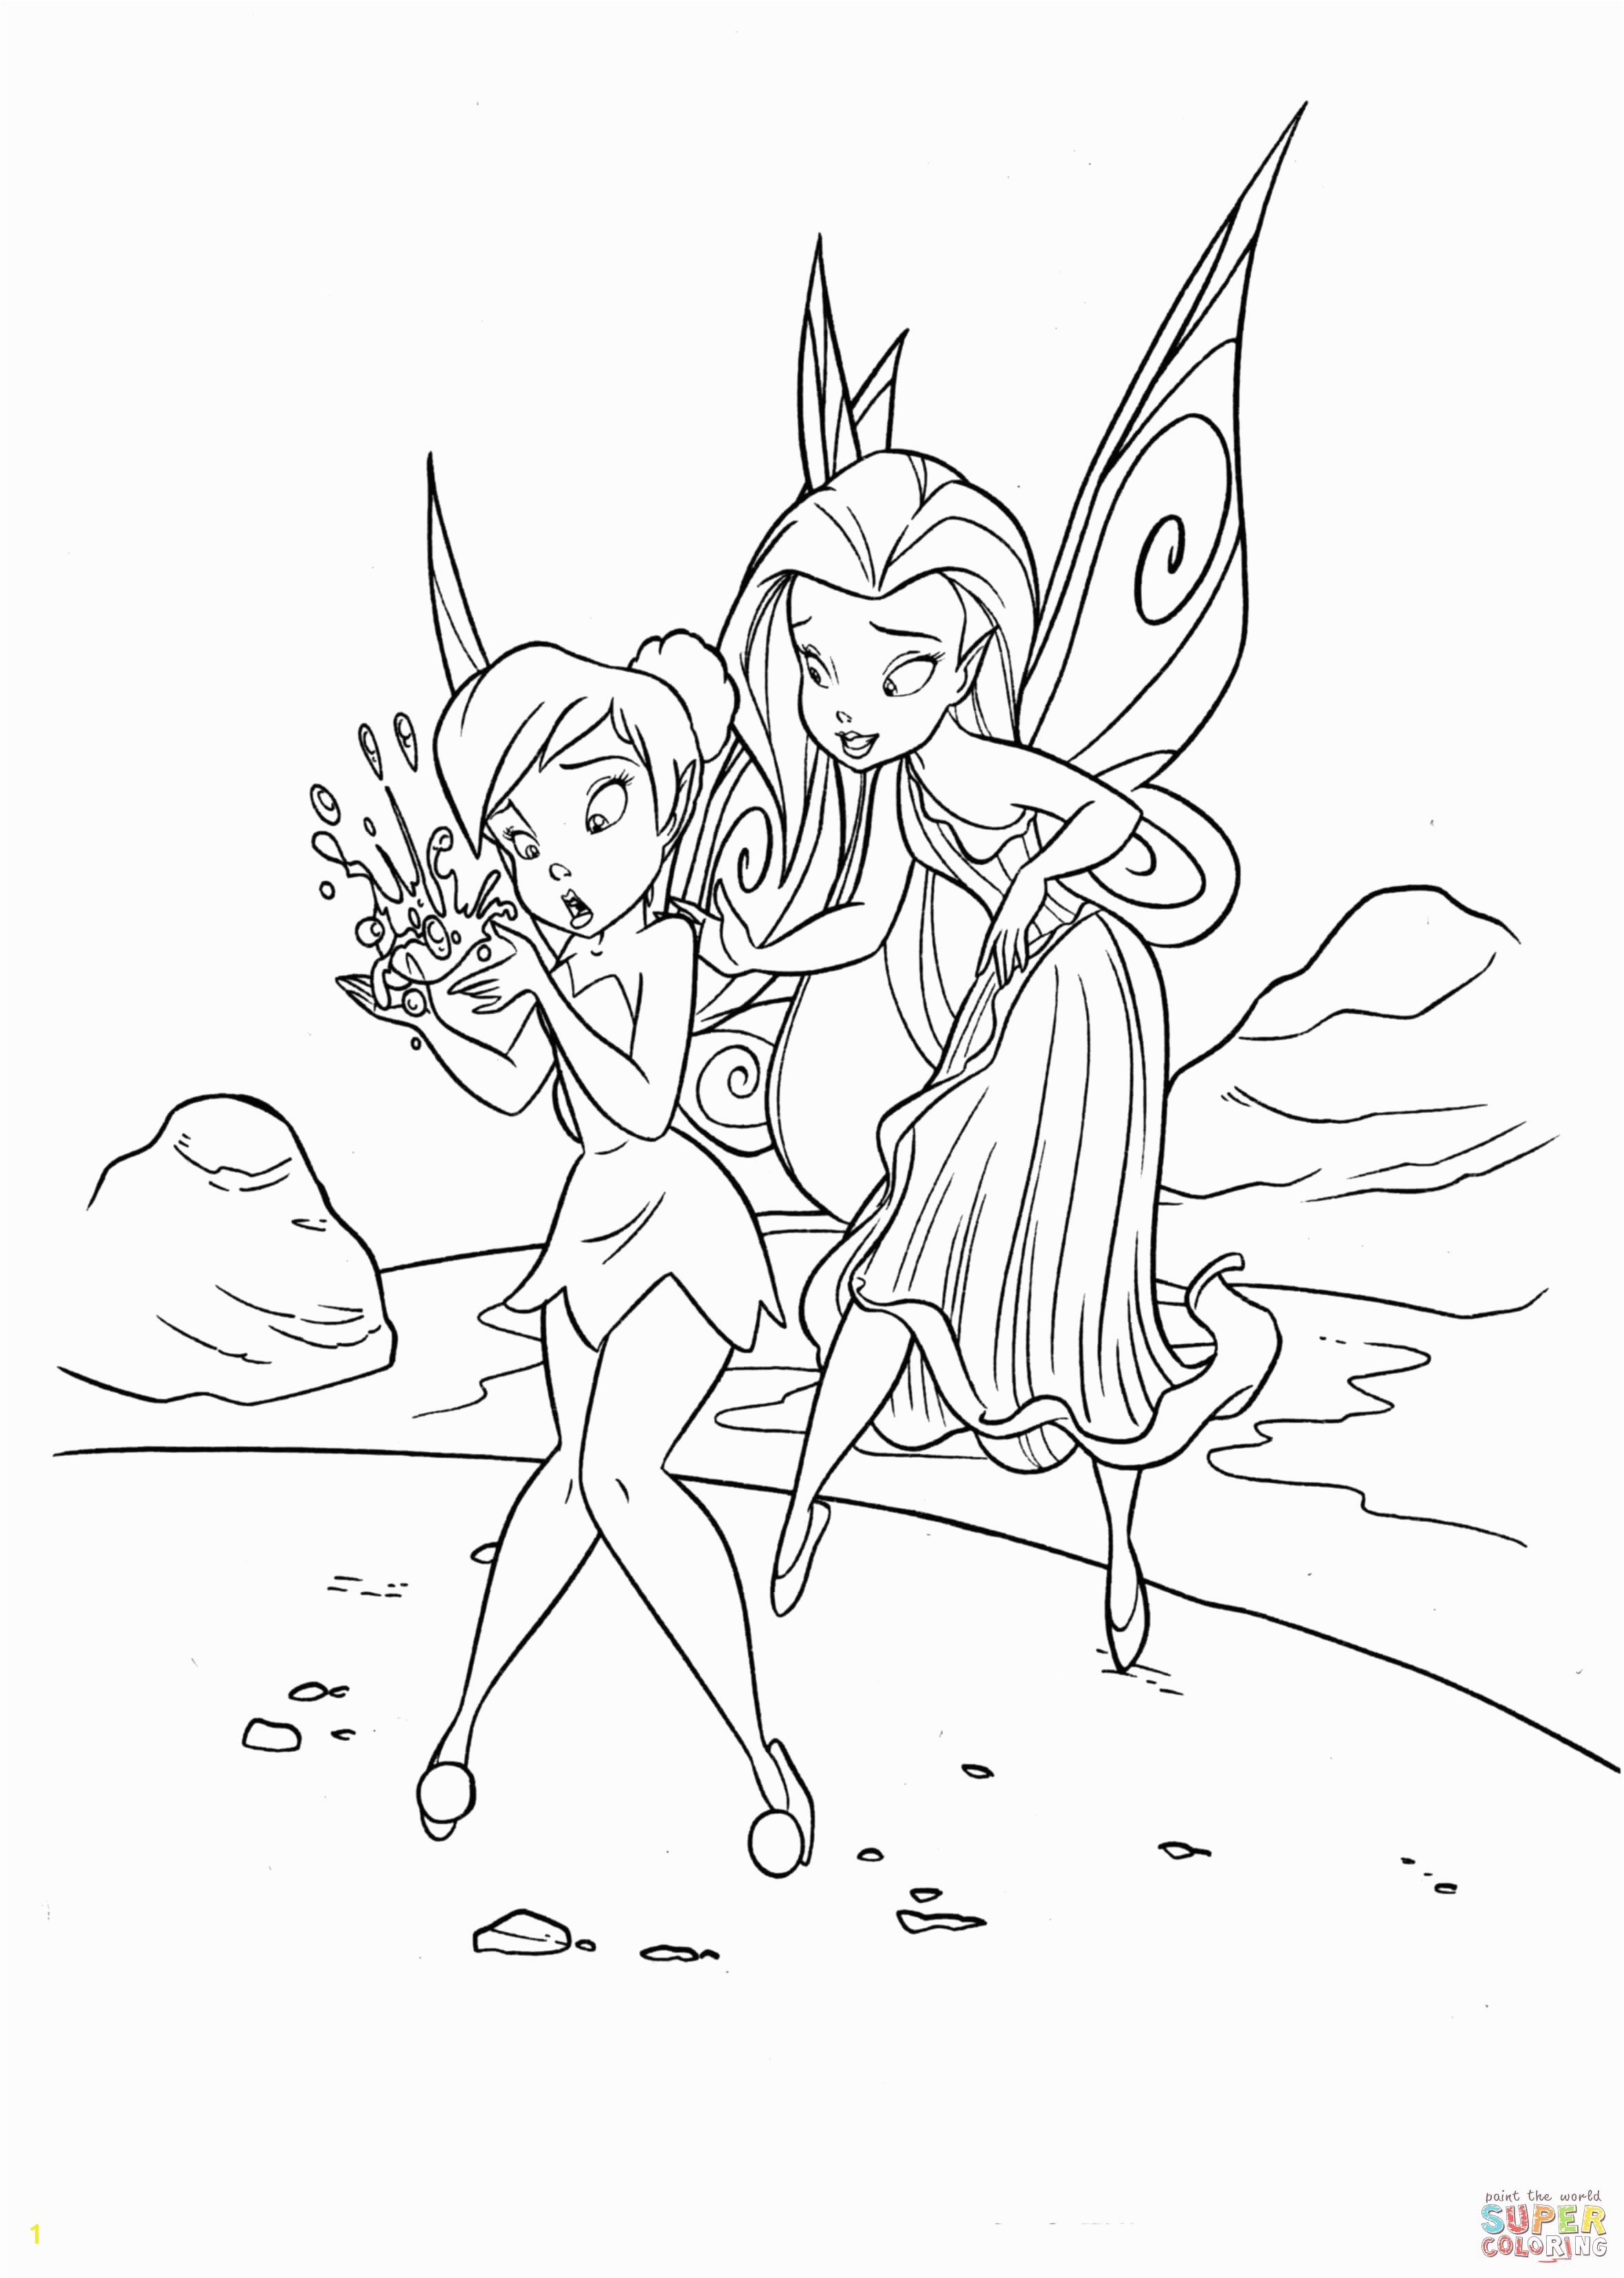 Free Printable Tinkerbell Coloring Pages Part 146 You Can Print that Can Be Default for